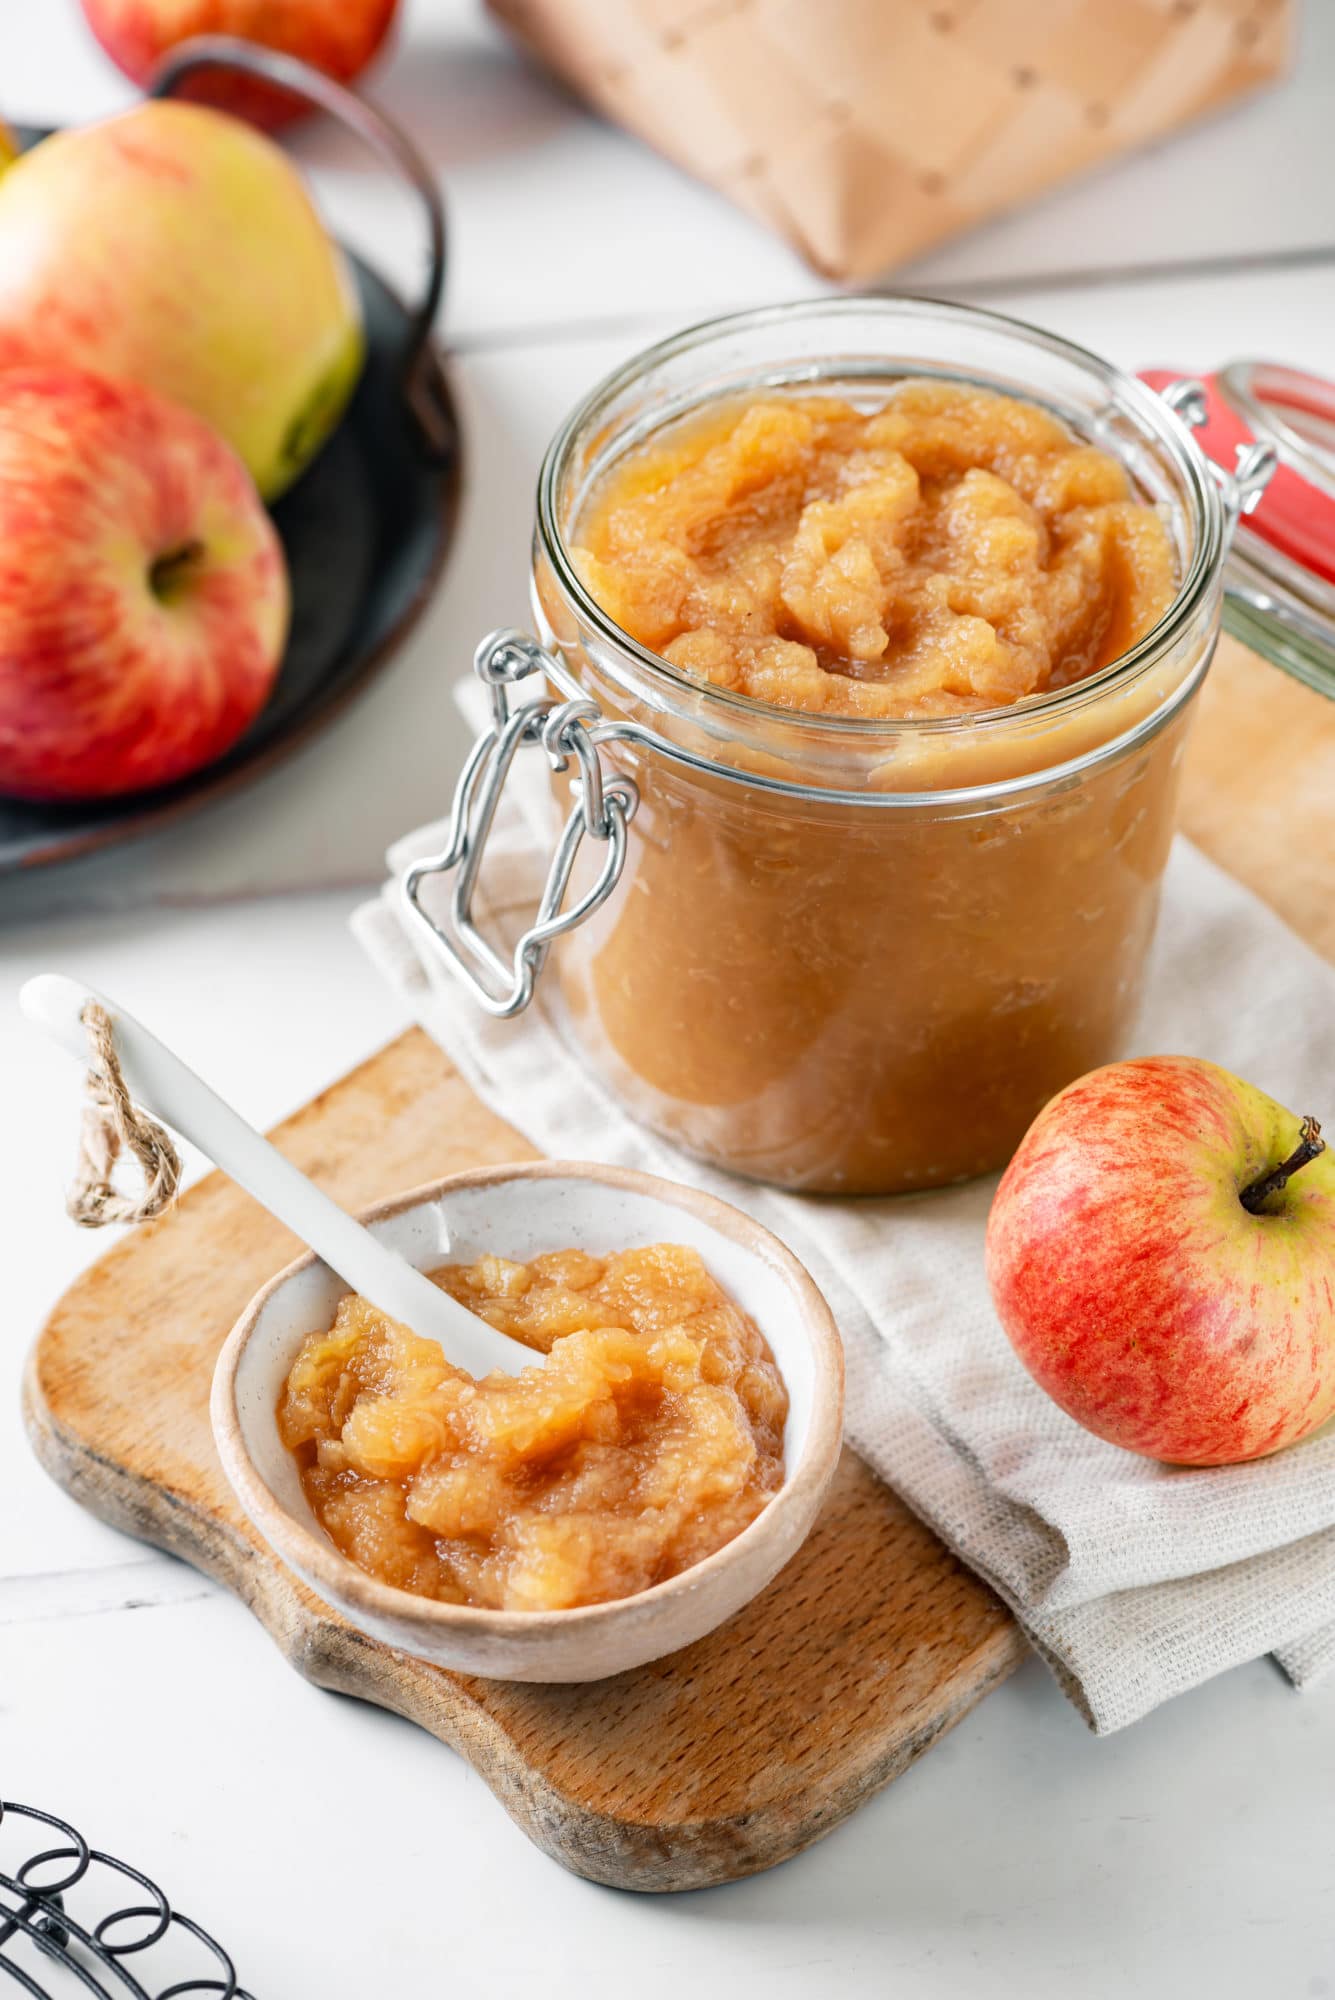 apple-jam-in-a-clear-jar-and-a-small-bowl-with-a-spoon-on-a-wooden-board-with-apples-on-the-side